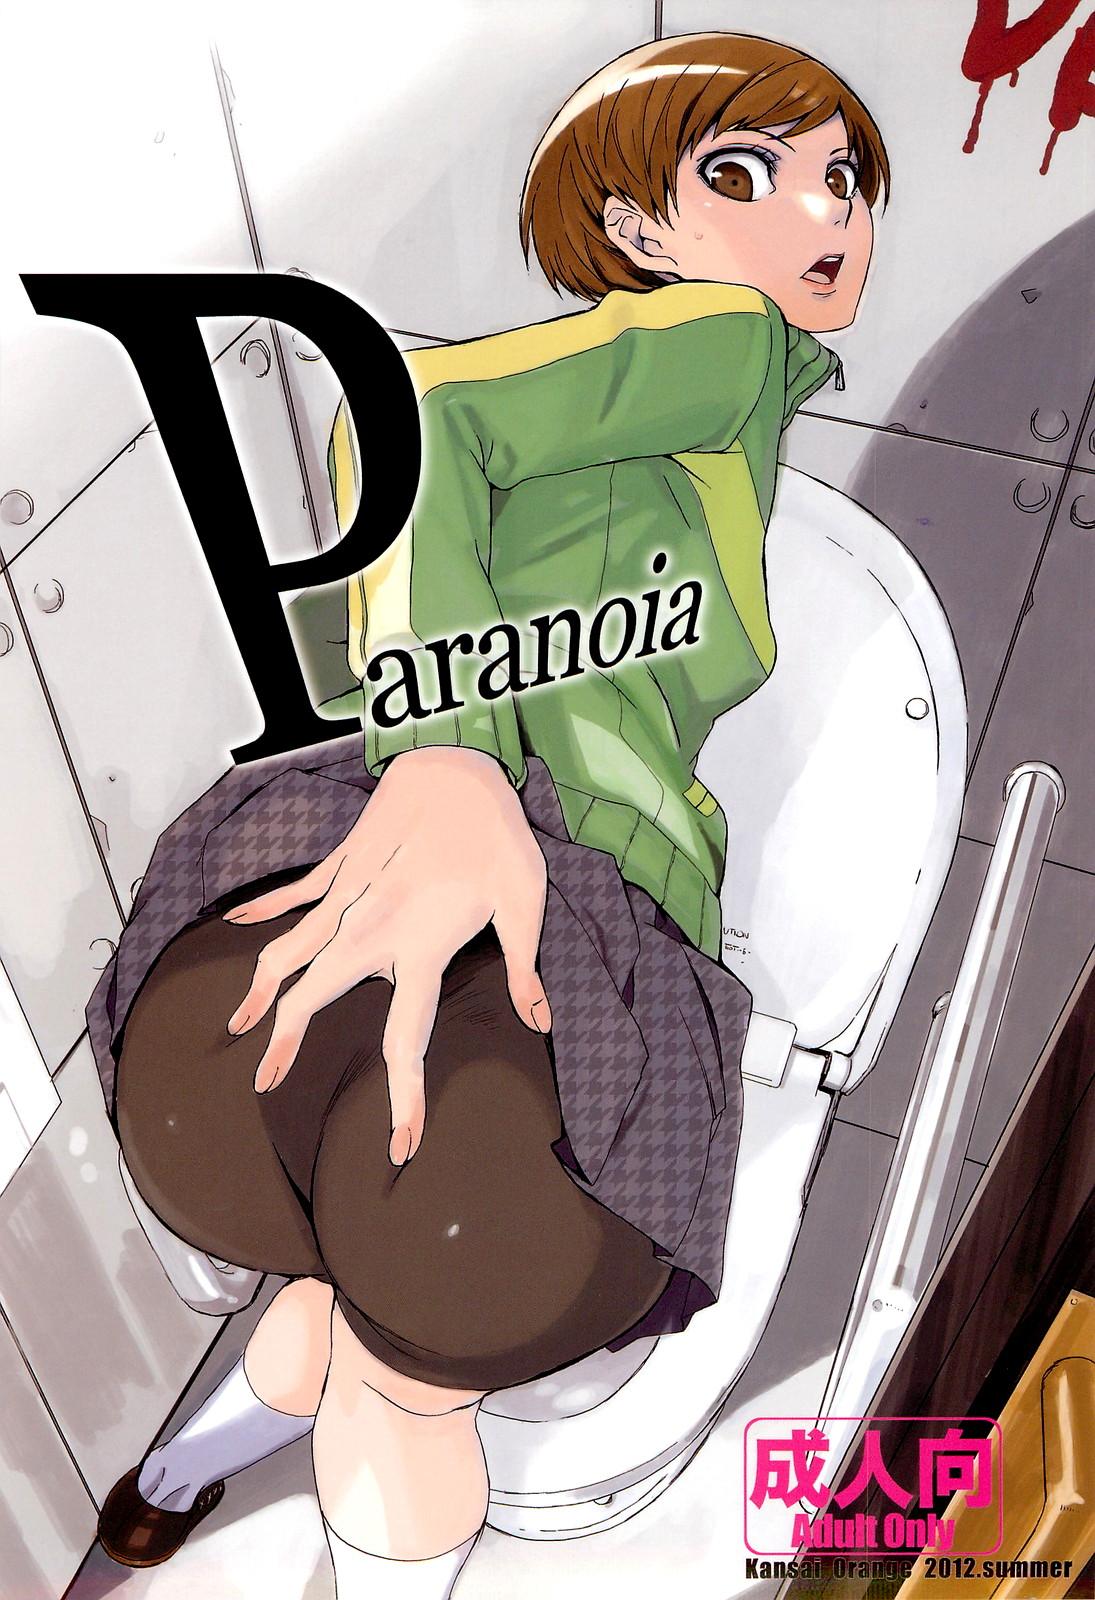 Amatuer Paranoia - Persona 4 Jerking Off - Page 1